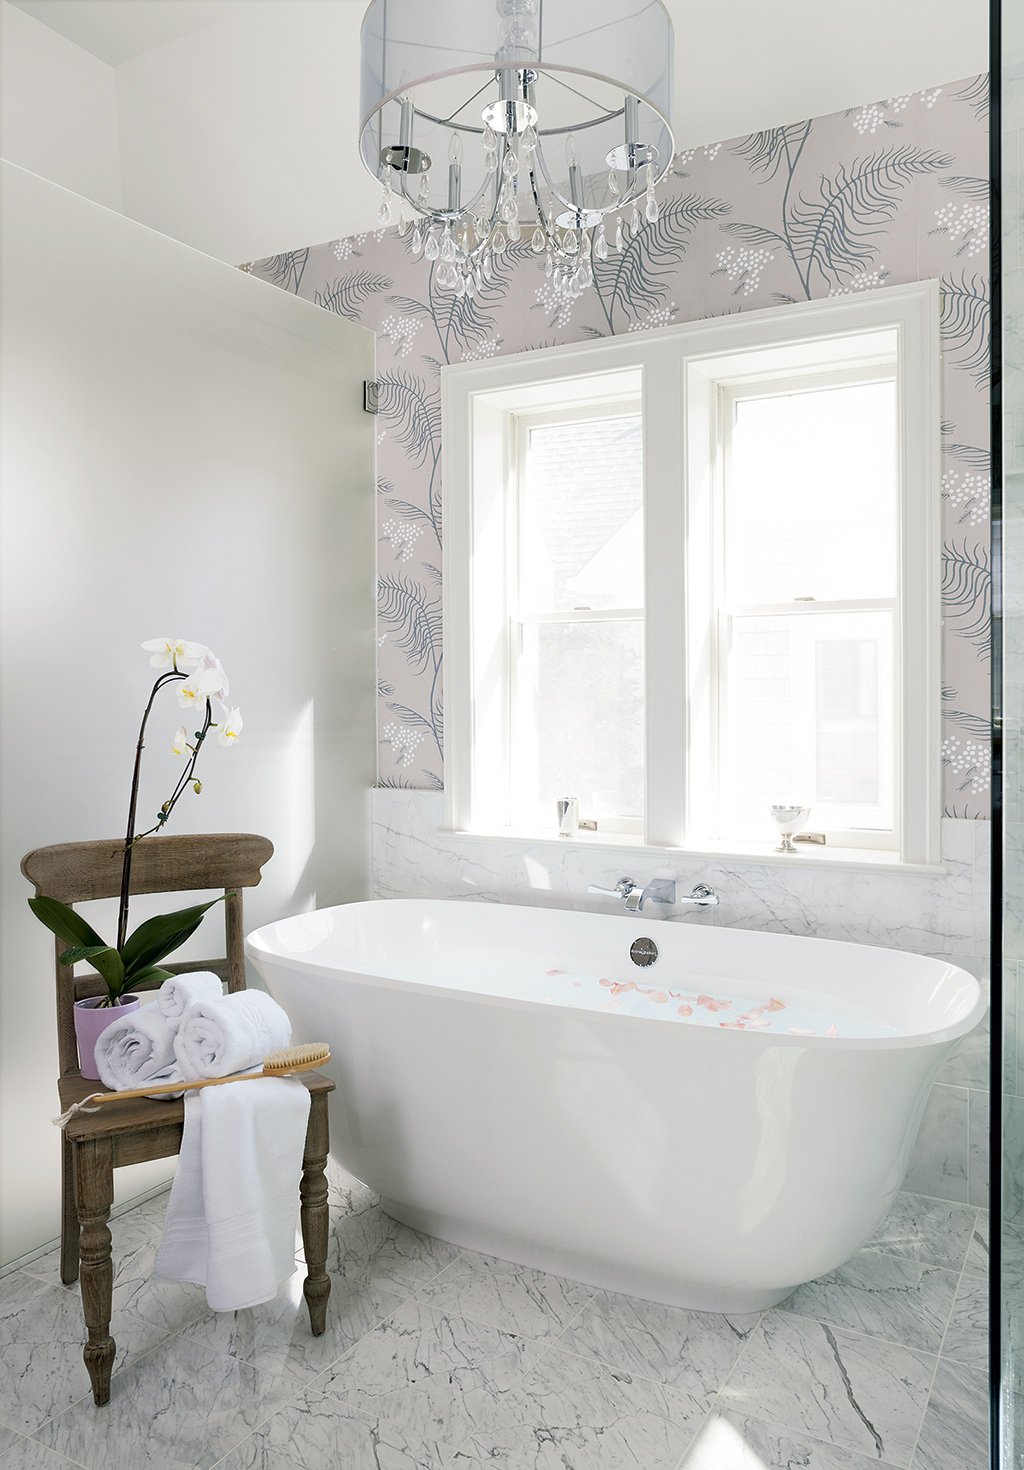 Jaw-dropping Inspiration for Your Master Bathroom